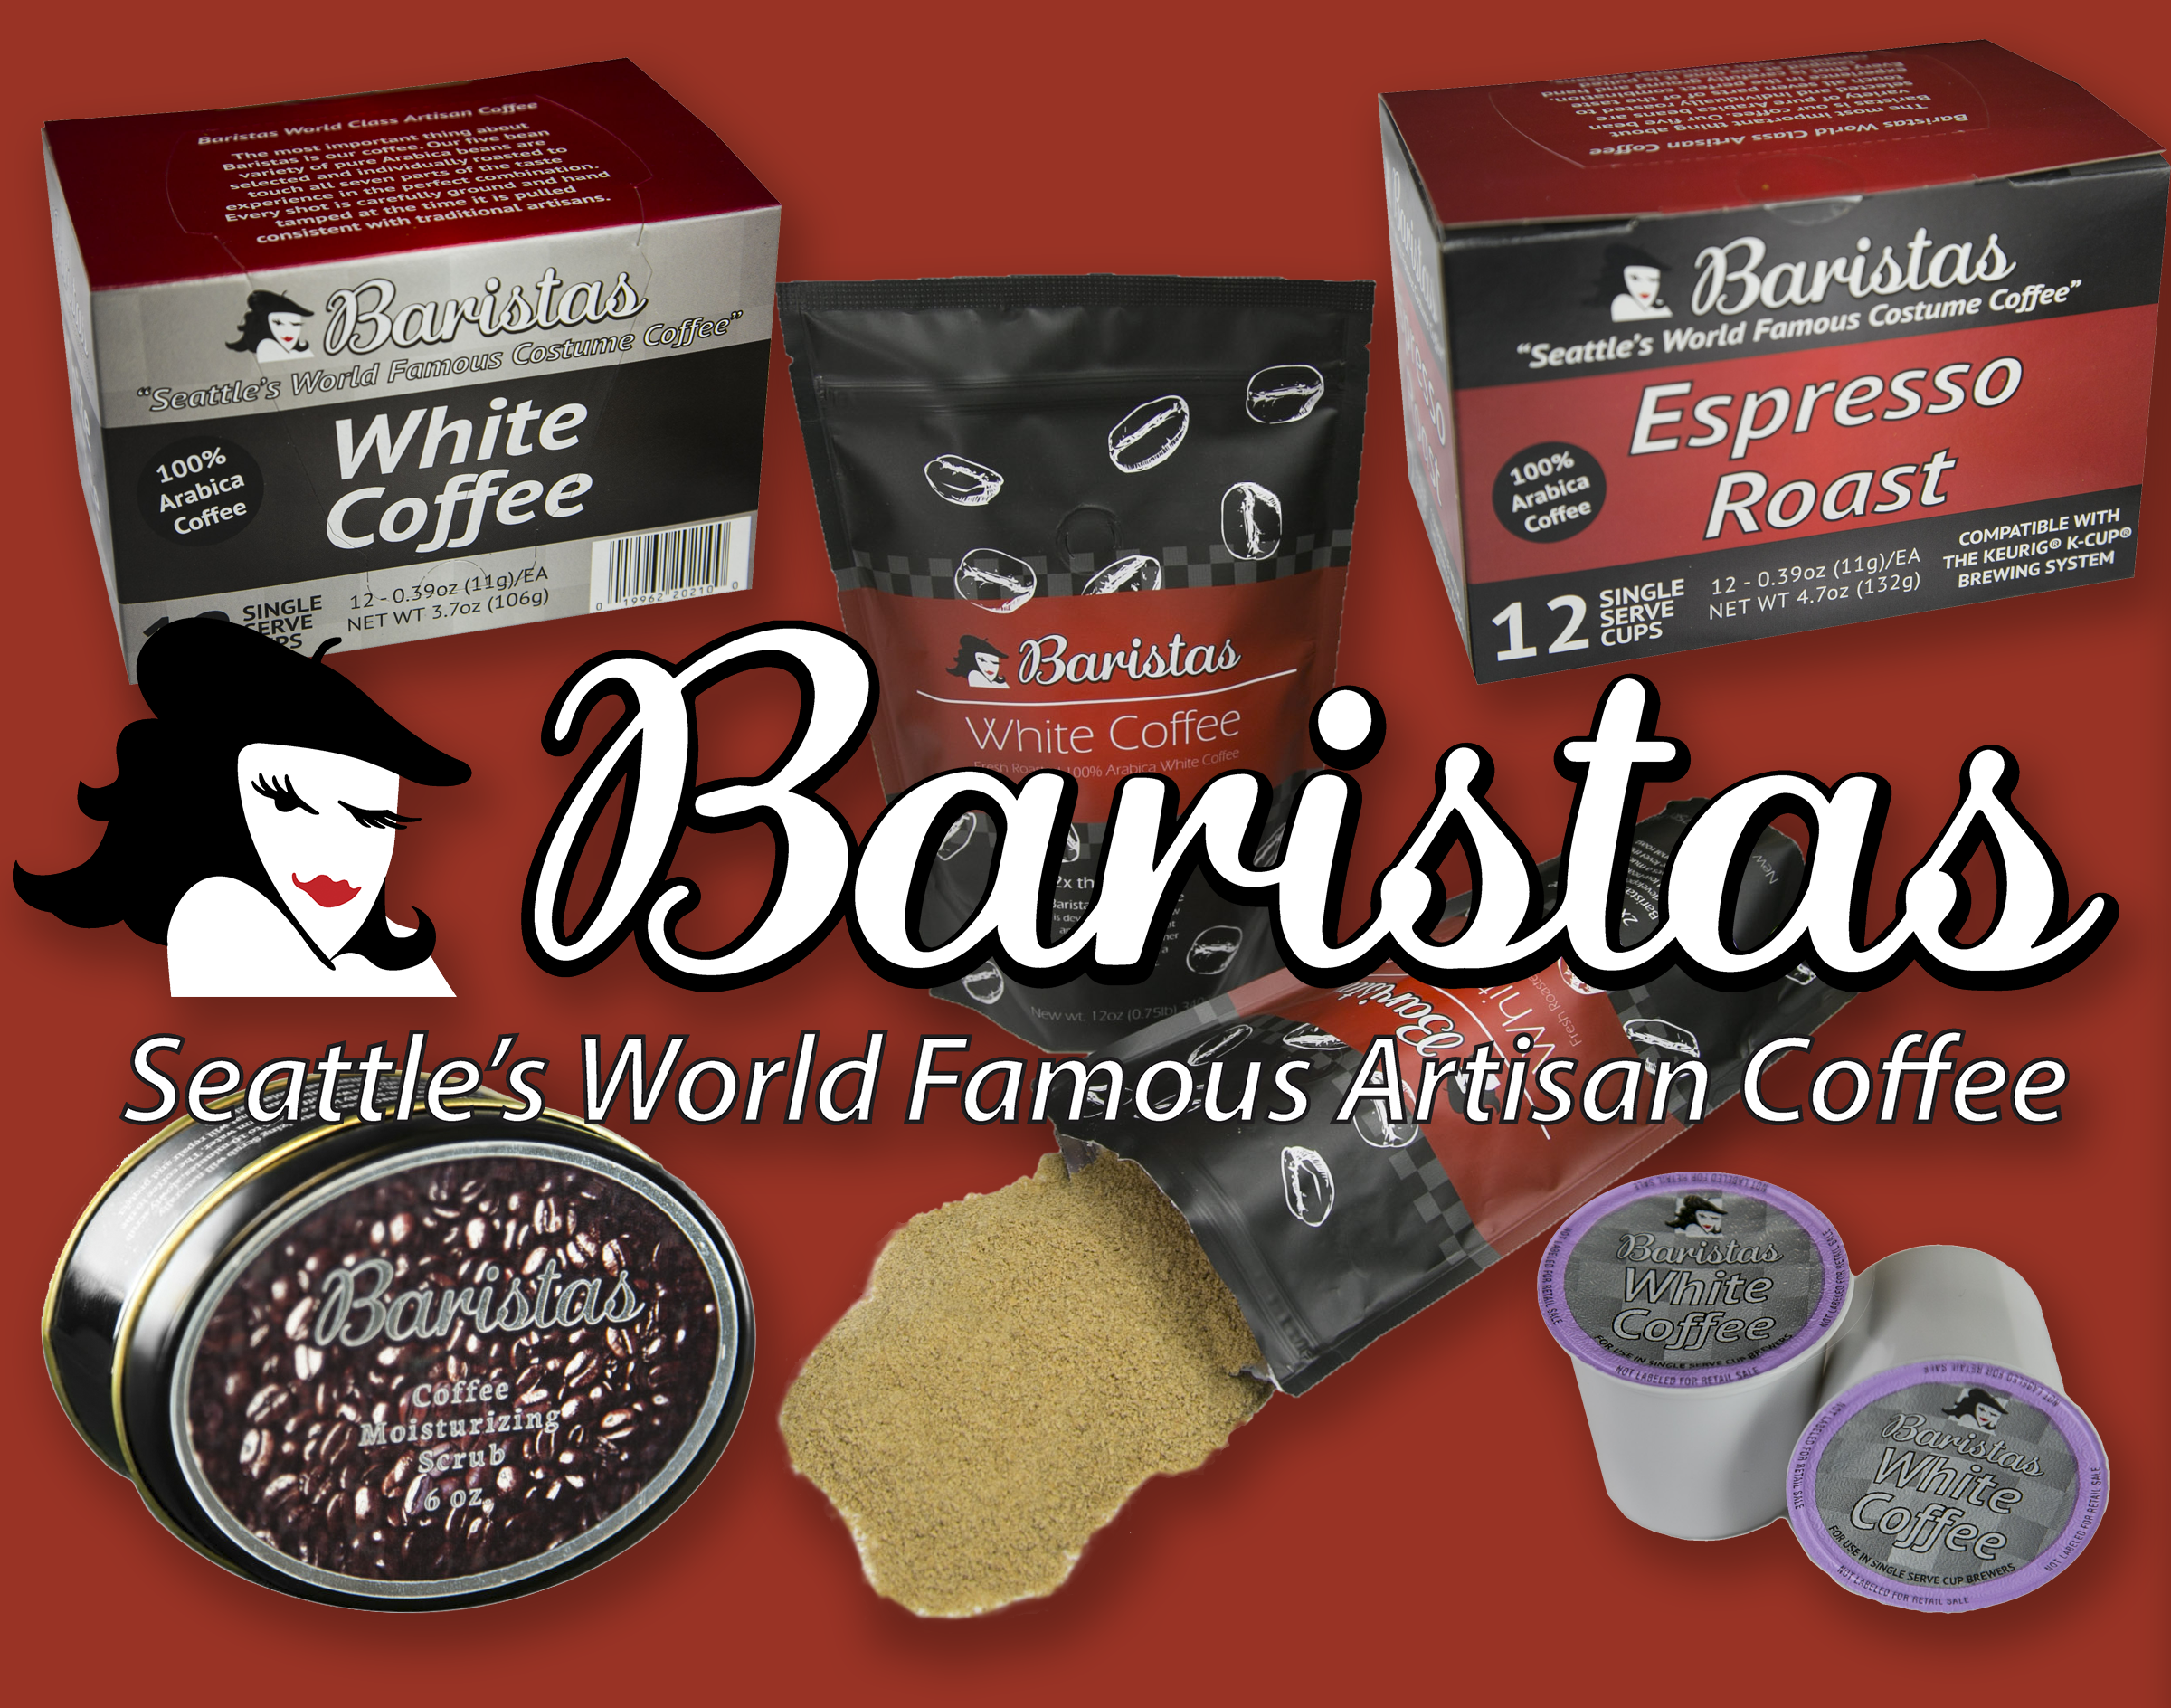 Baristas Coffee Company Inc., Thursday, September 19, 2019, Press release picture